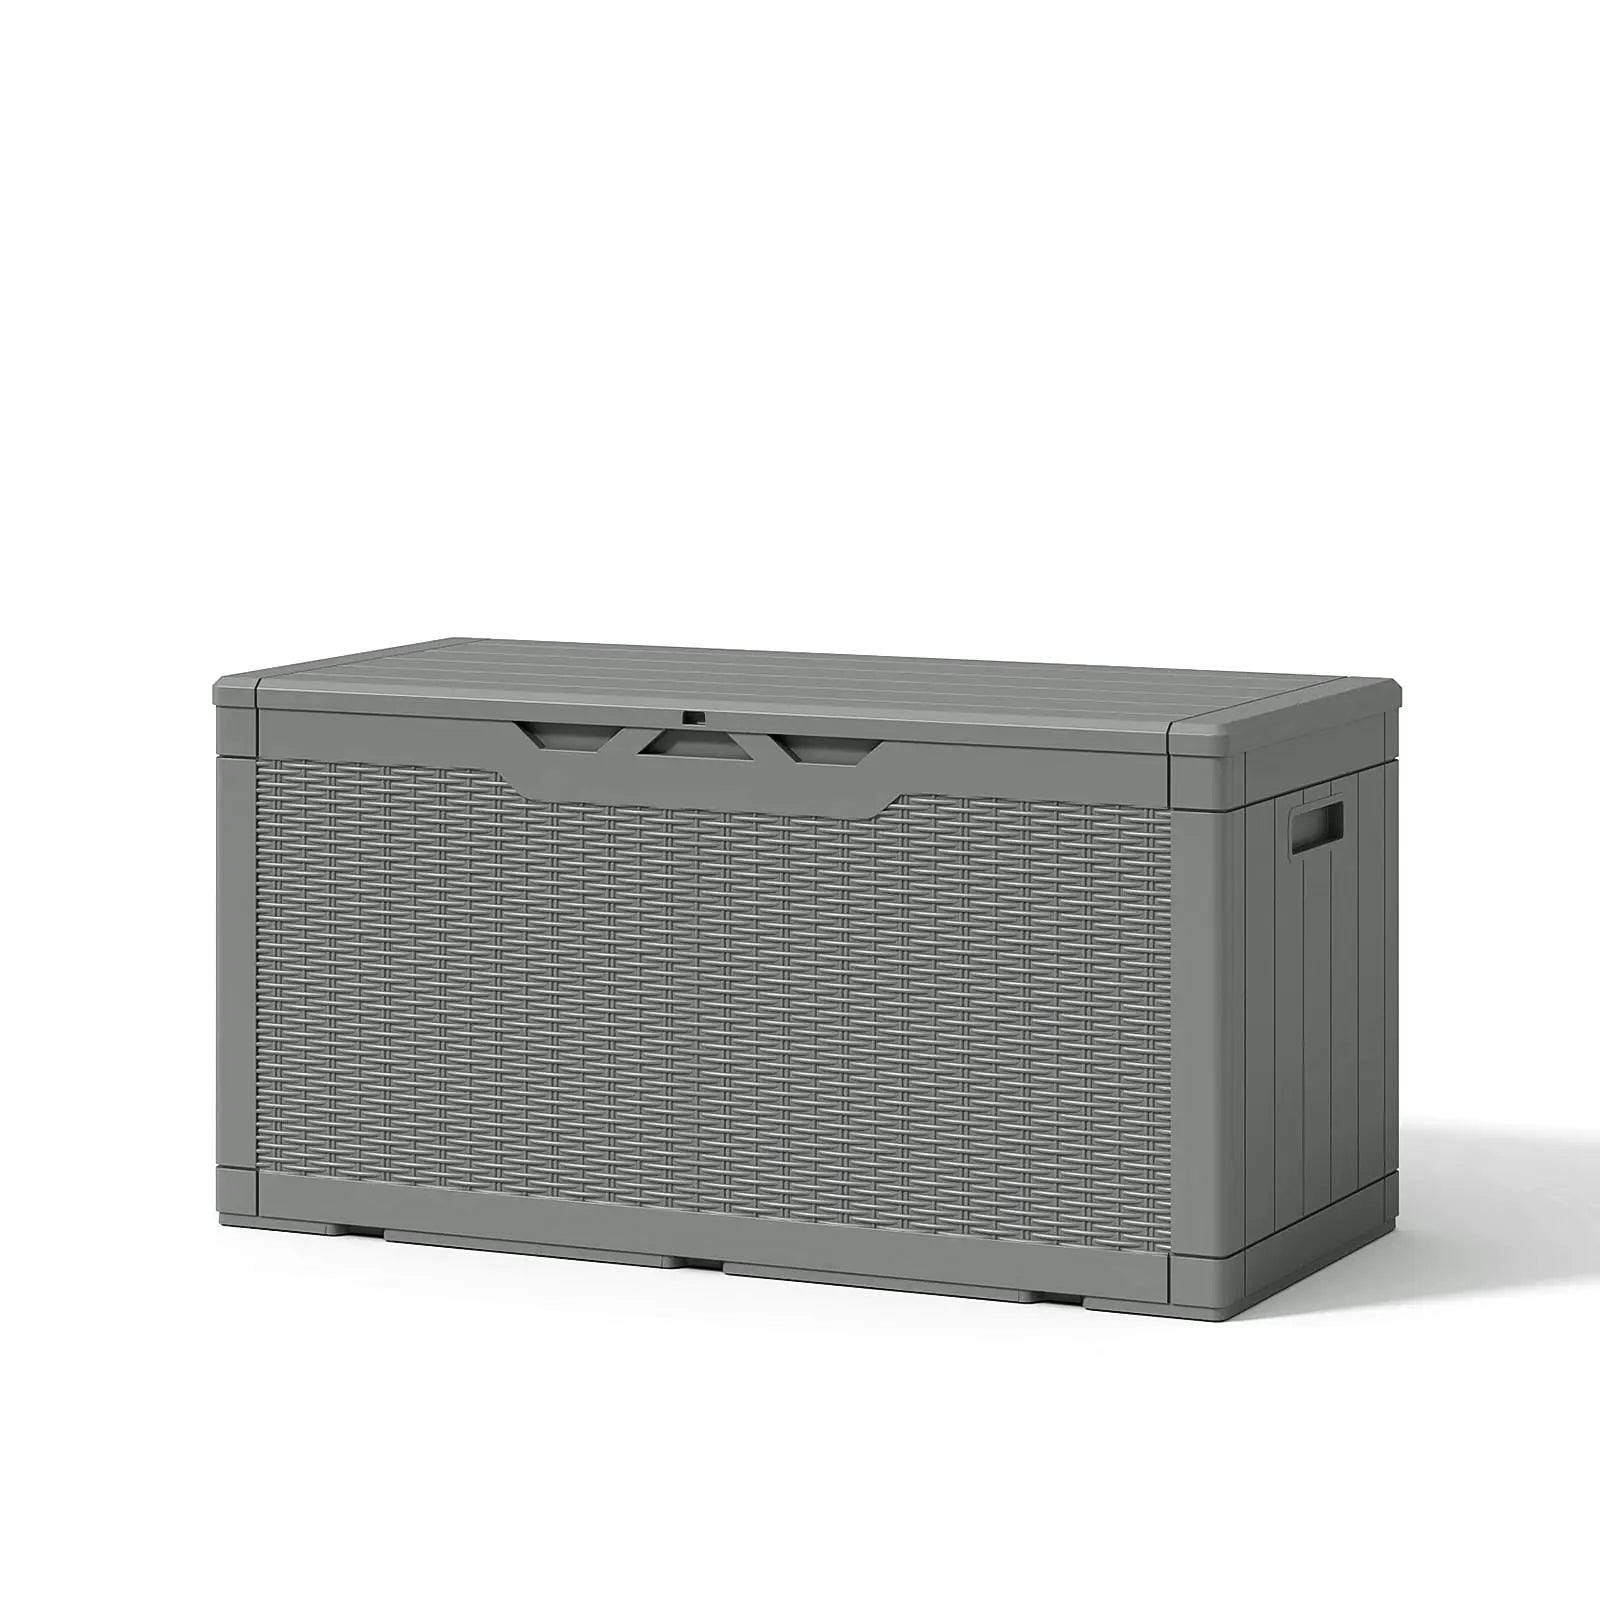 The 100 gallon ourdoor storage deck box in cool gray color